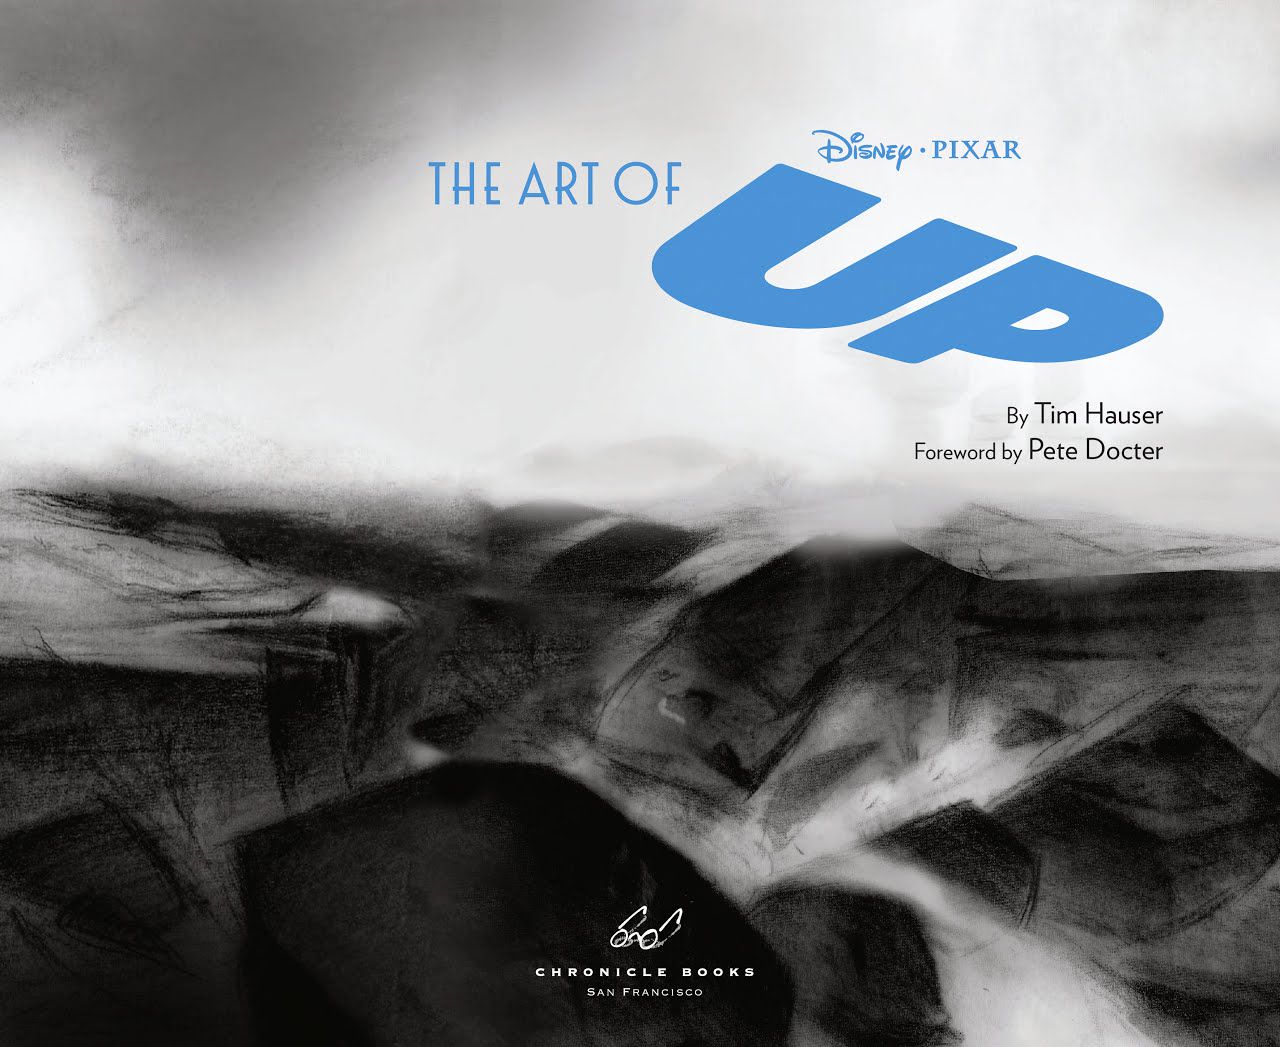 The Art of Up 4